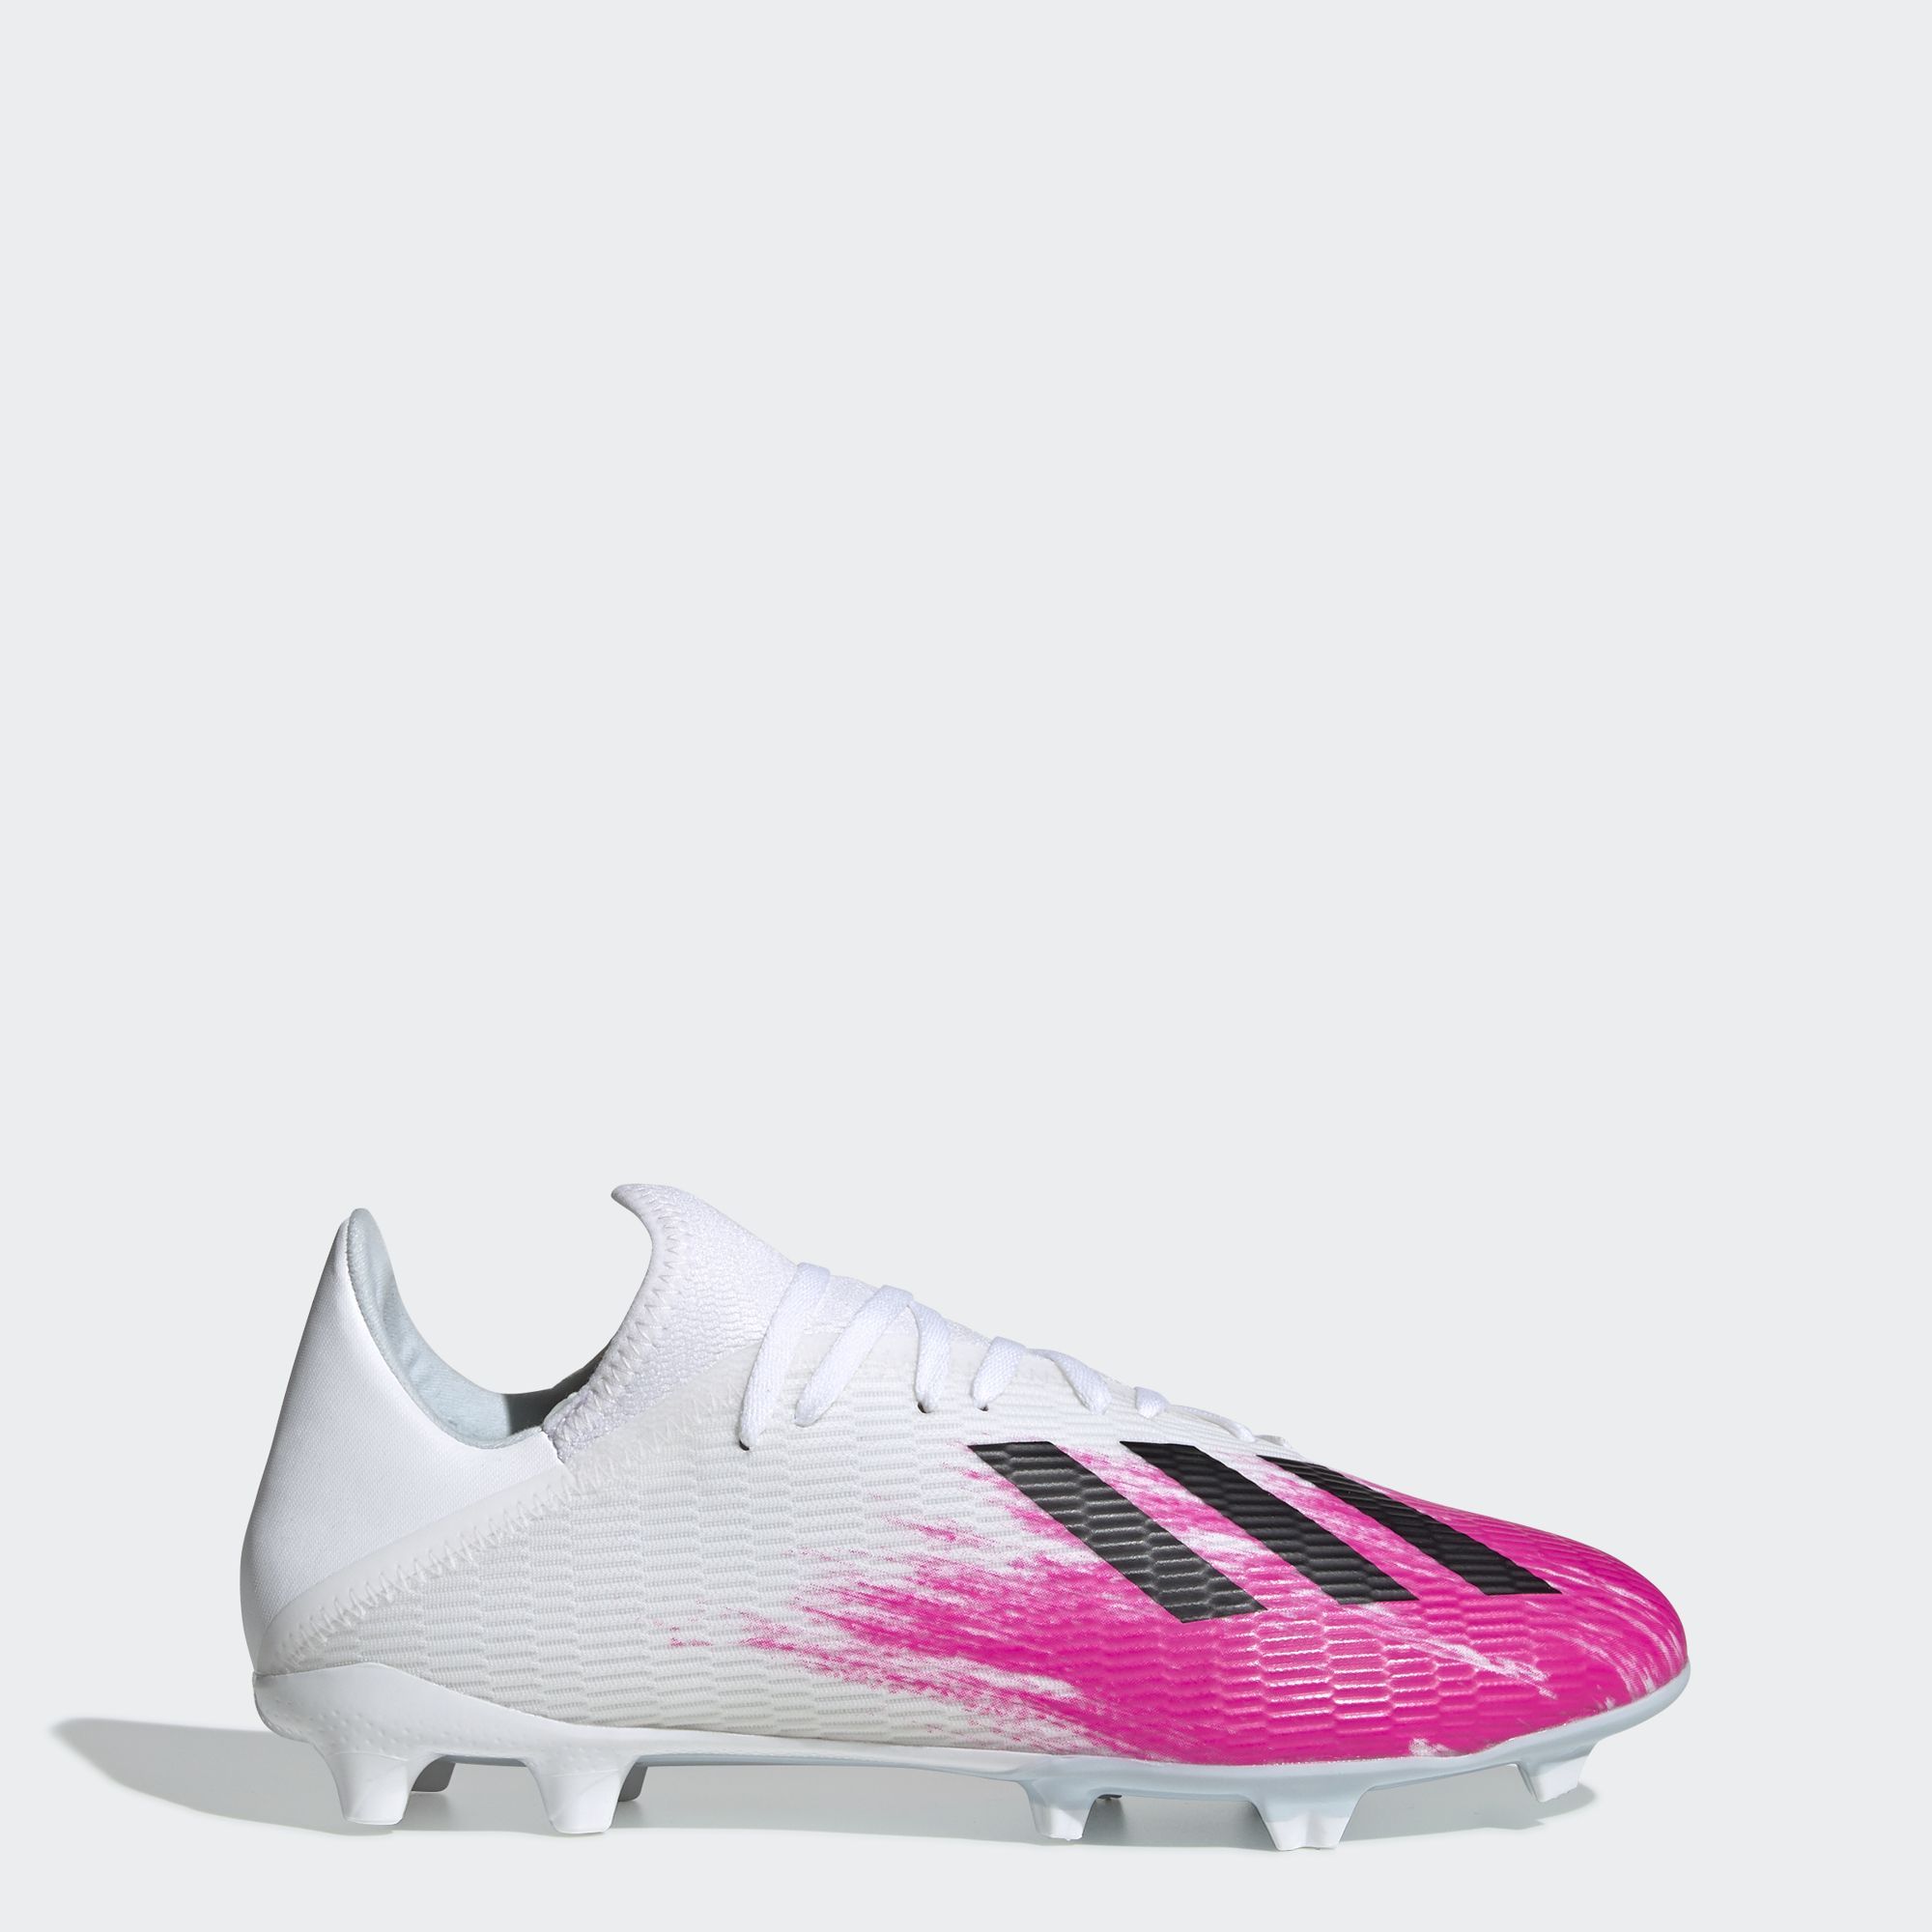 Buy Adidas Football Shoes Online 